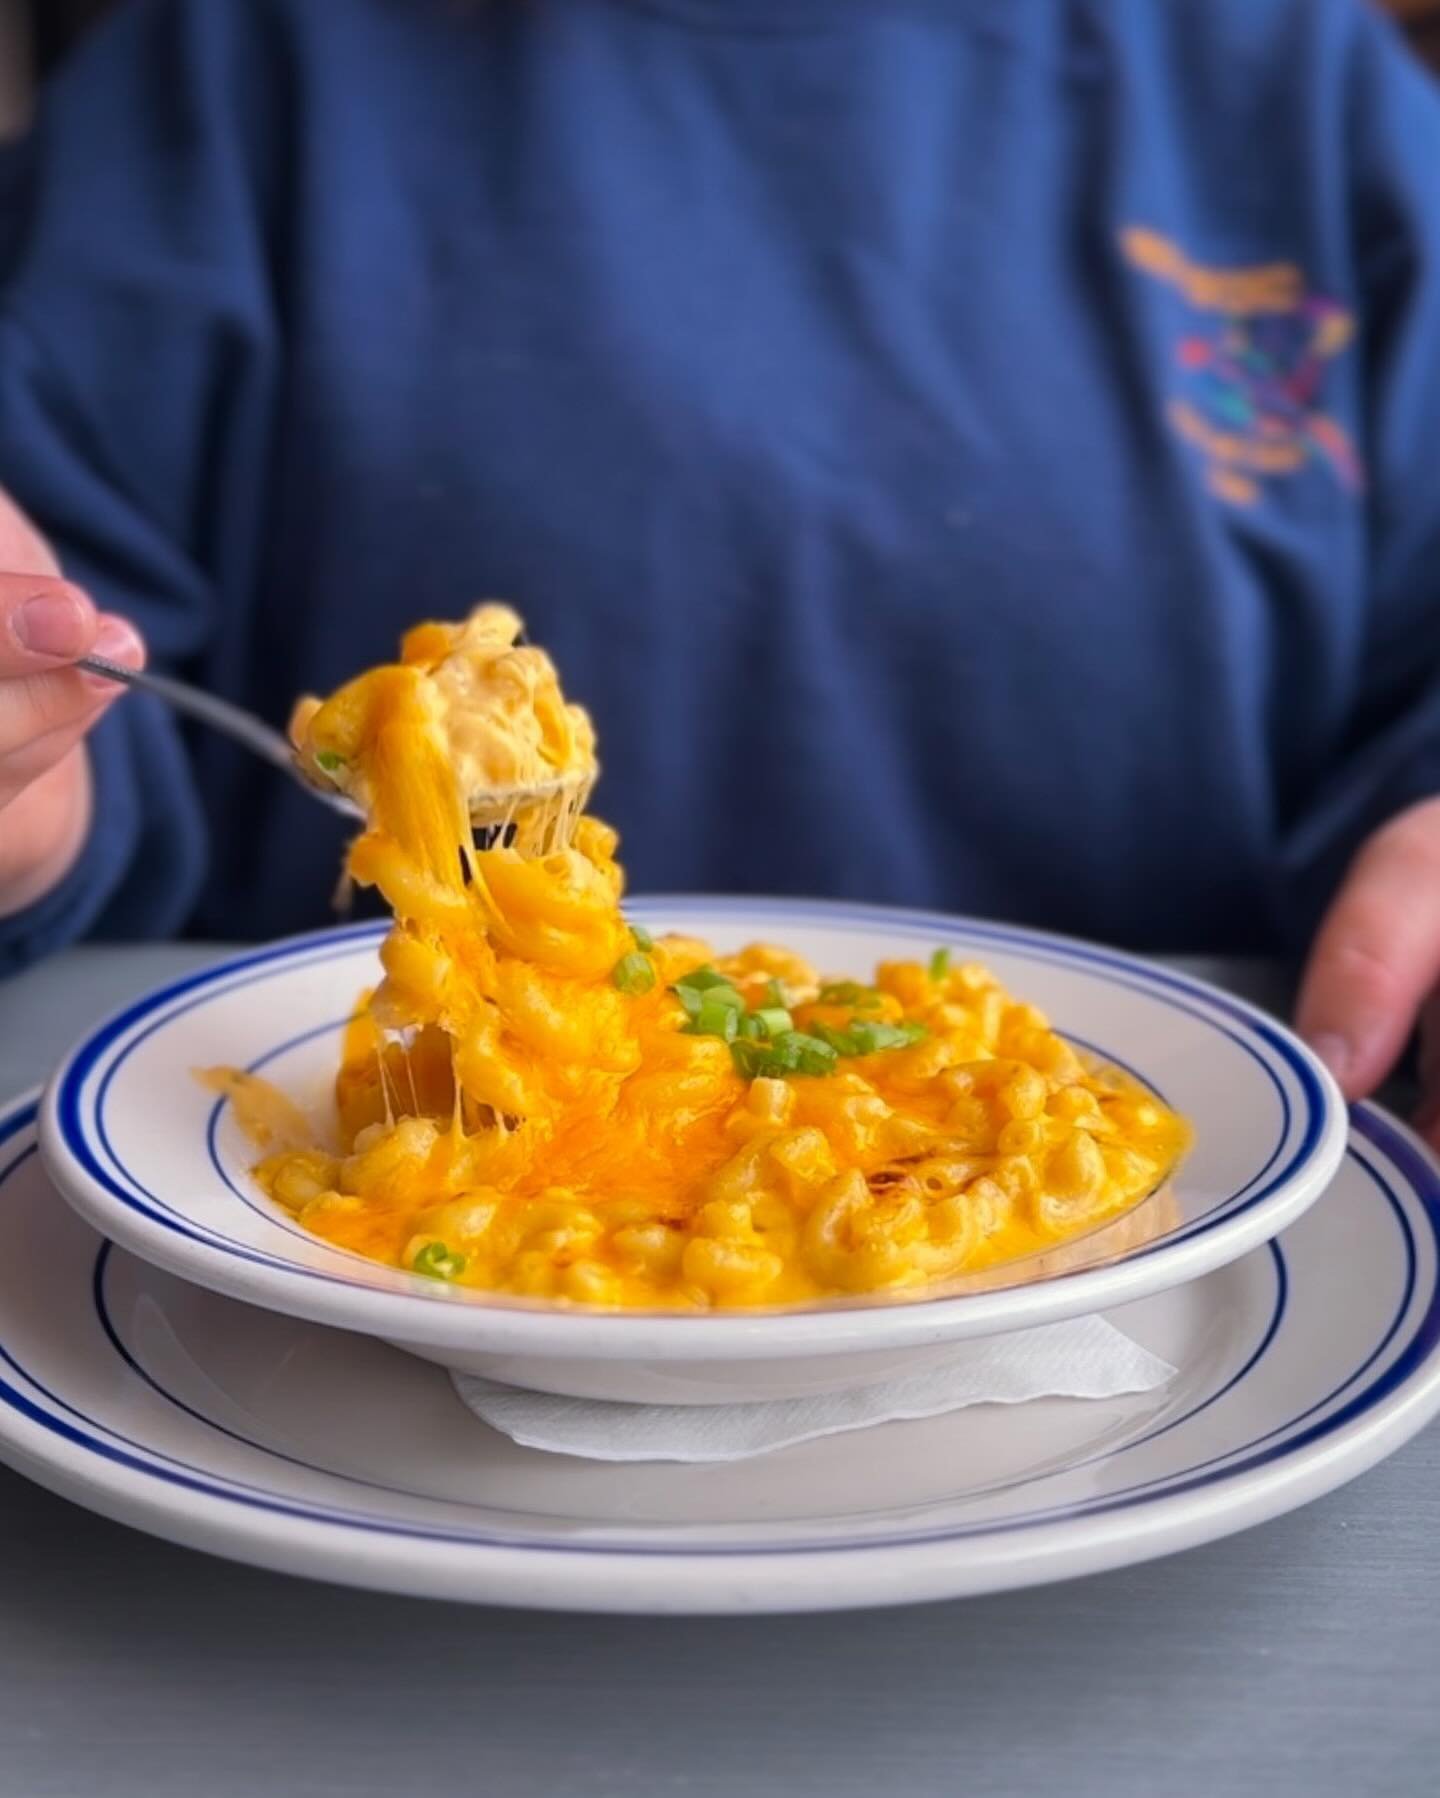 Sigh, it&rsquo;s Tuesday again.
You know what helps? Cheese. And booze. 
Turns out we&rsquo;ve got @shepherdexpress award winning Mac &amp; Cheese, and a Tuesday Beer and Shot special. Seems like your night just got planned for you. 
You. Are. Welcom